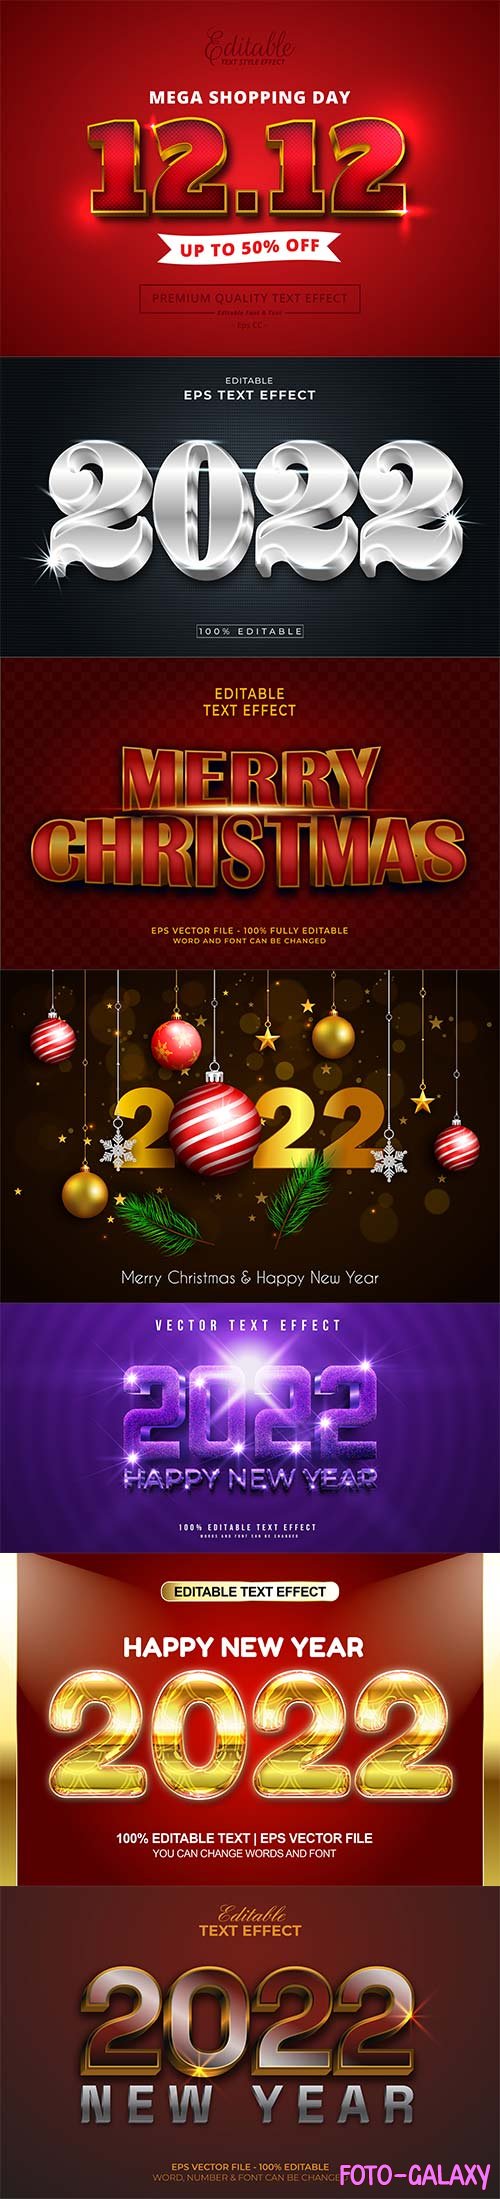 2022 New year and christmas editable text effect vector vol 38